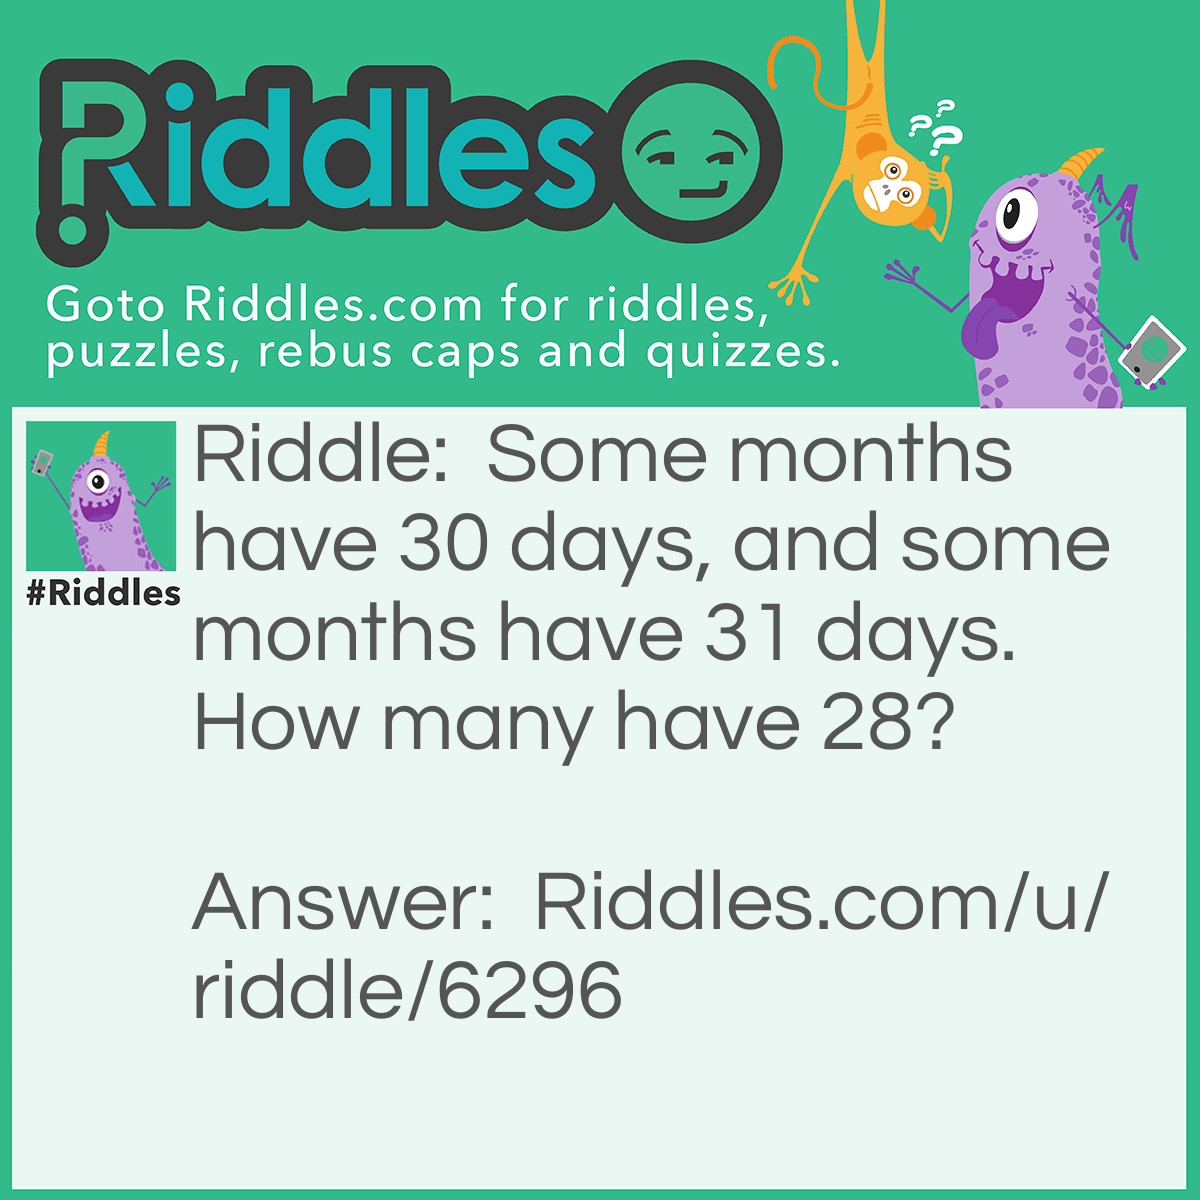 Riddle: Some months have 30 days, and some months have 31 days. How many have 28? Answer: All of them.